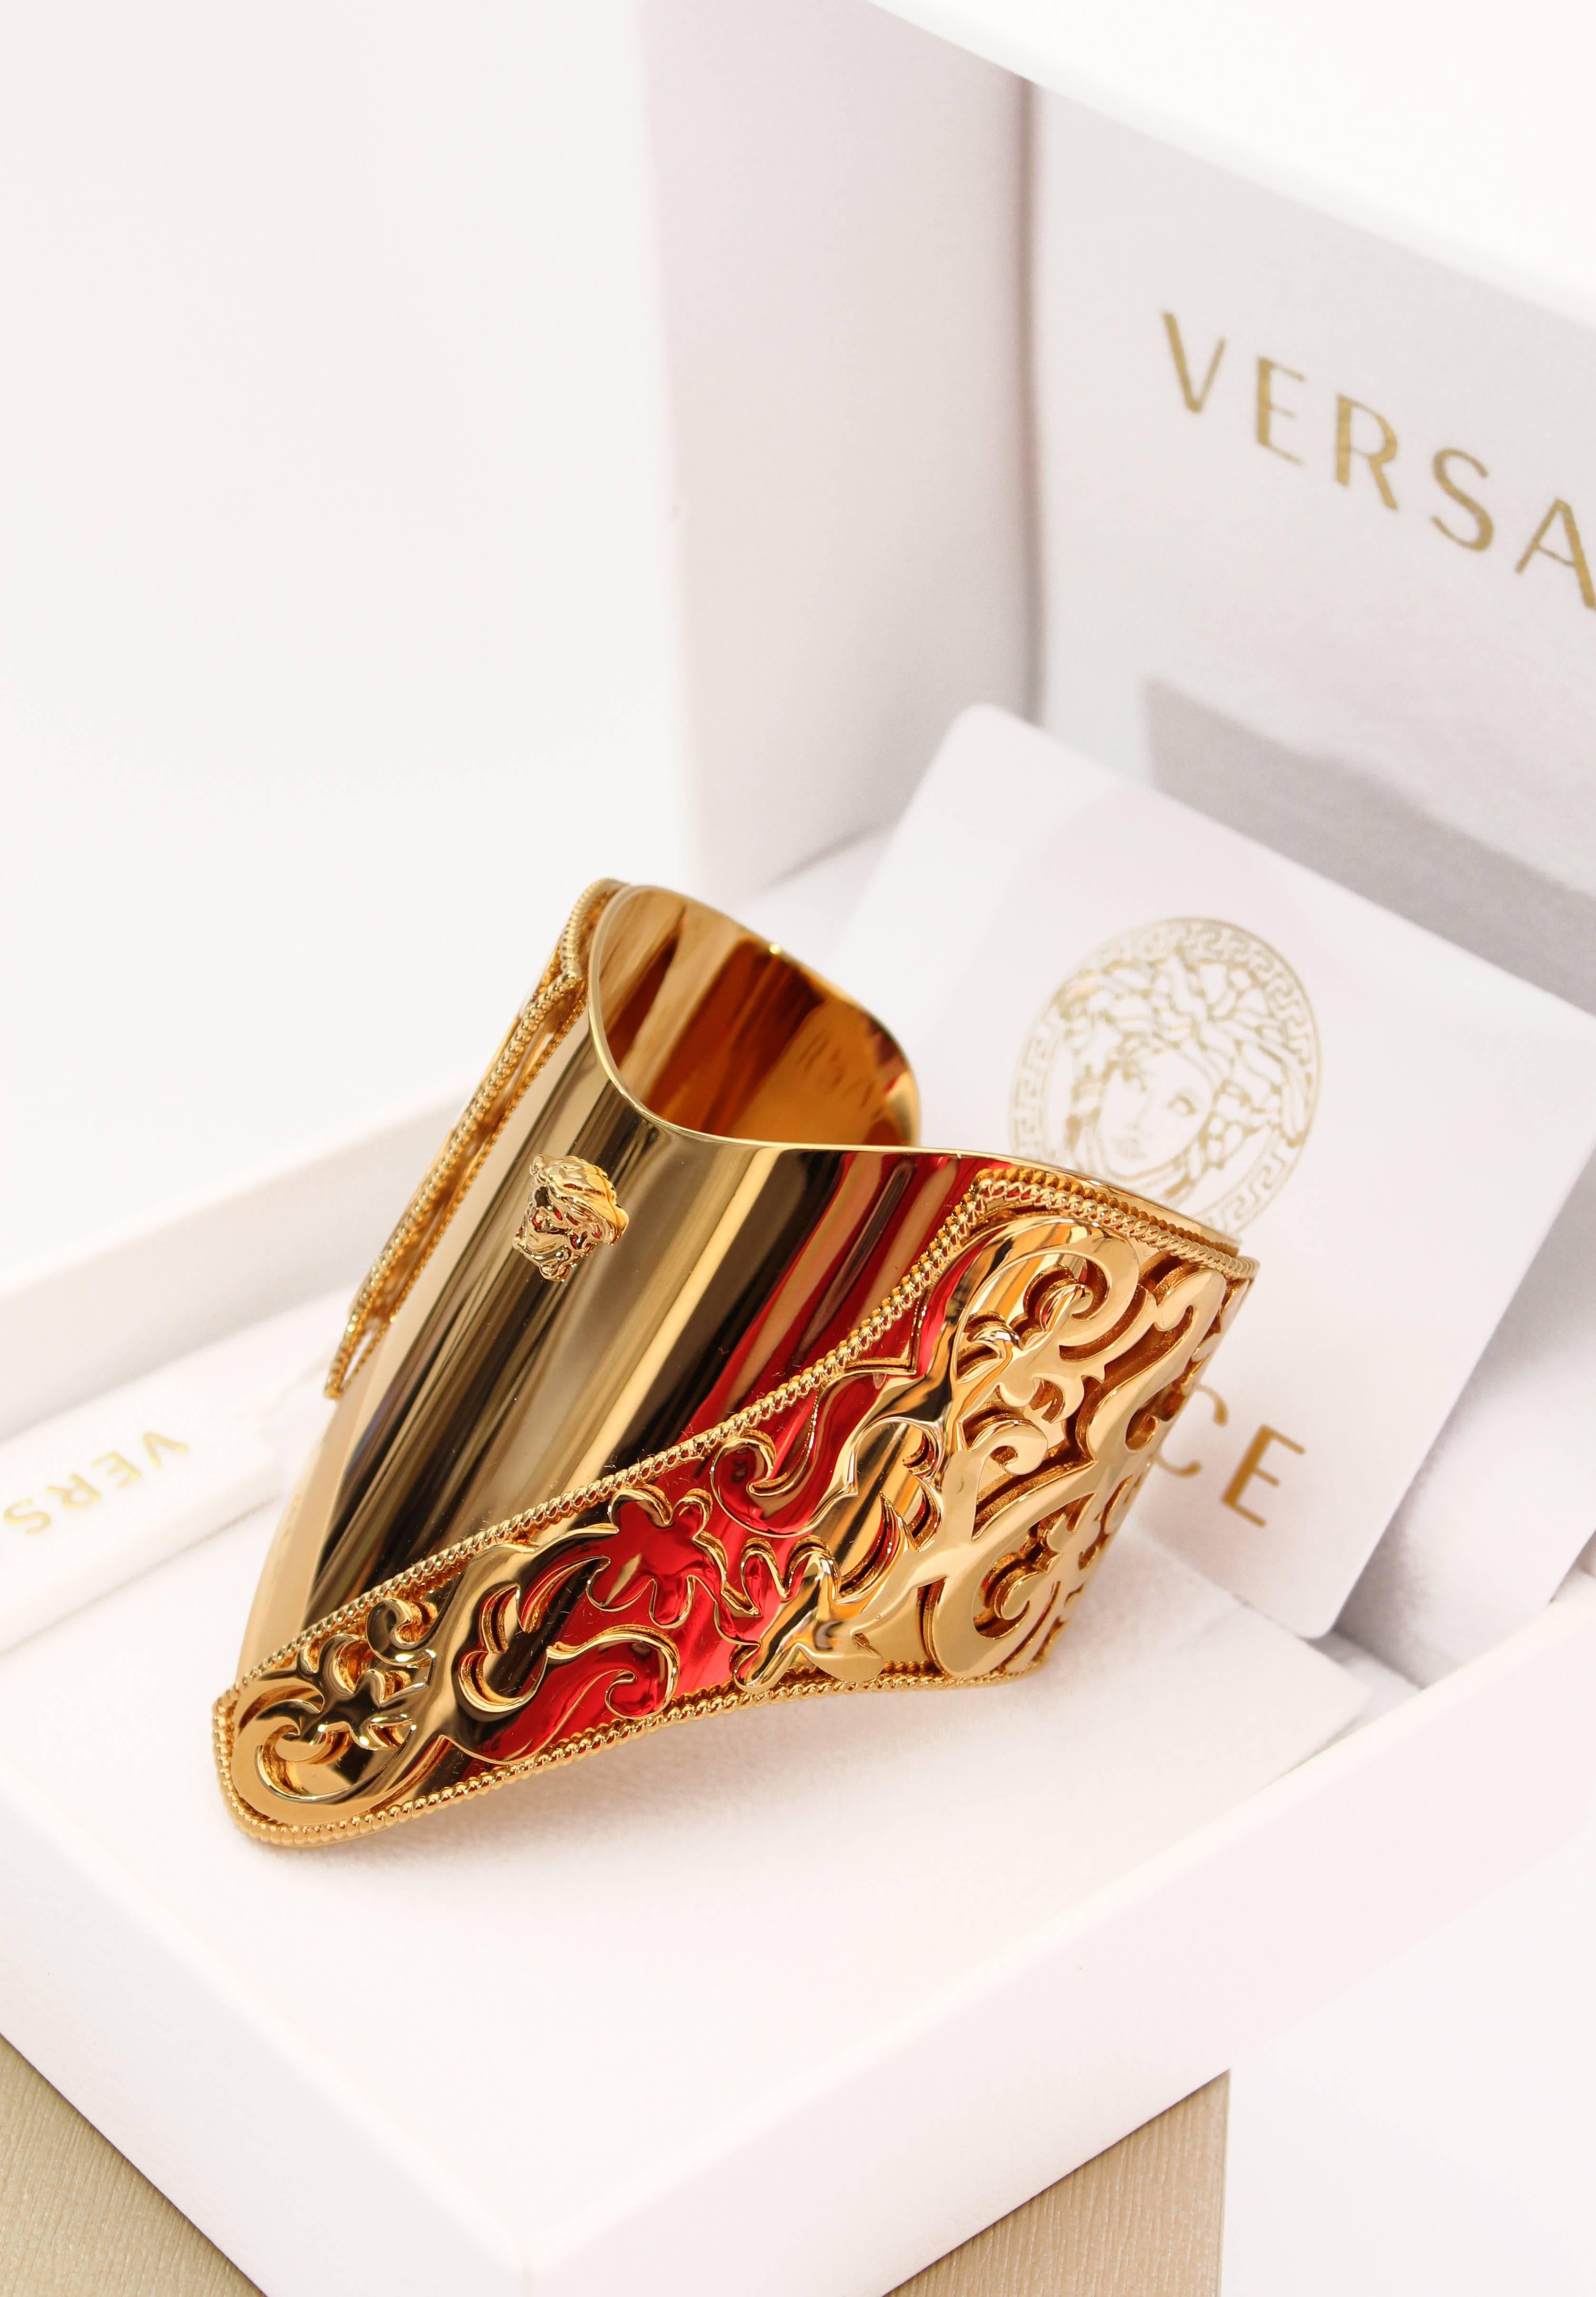 VERSACE

Take your accessorizing to a new level of luxury with this Versace cuff bracelet.
 
24K Gold Plated Metal

Made in Italy

Comes with Versace box.

Display model 